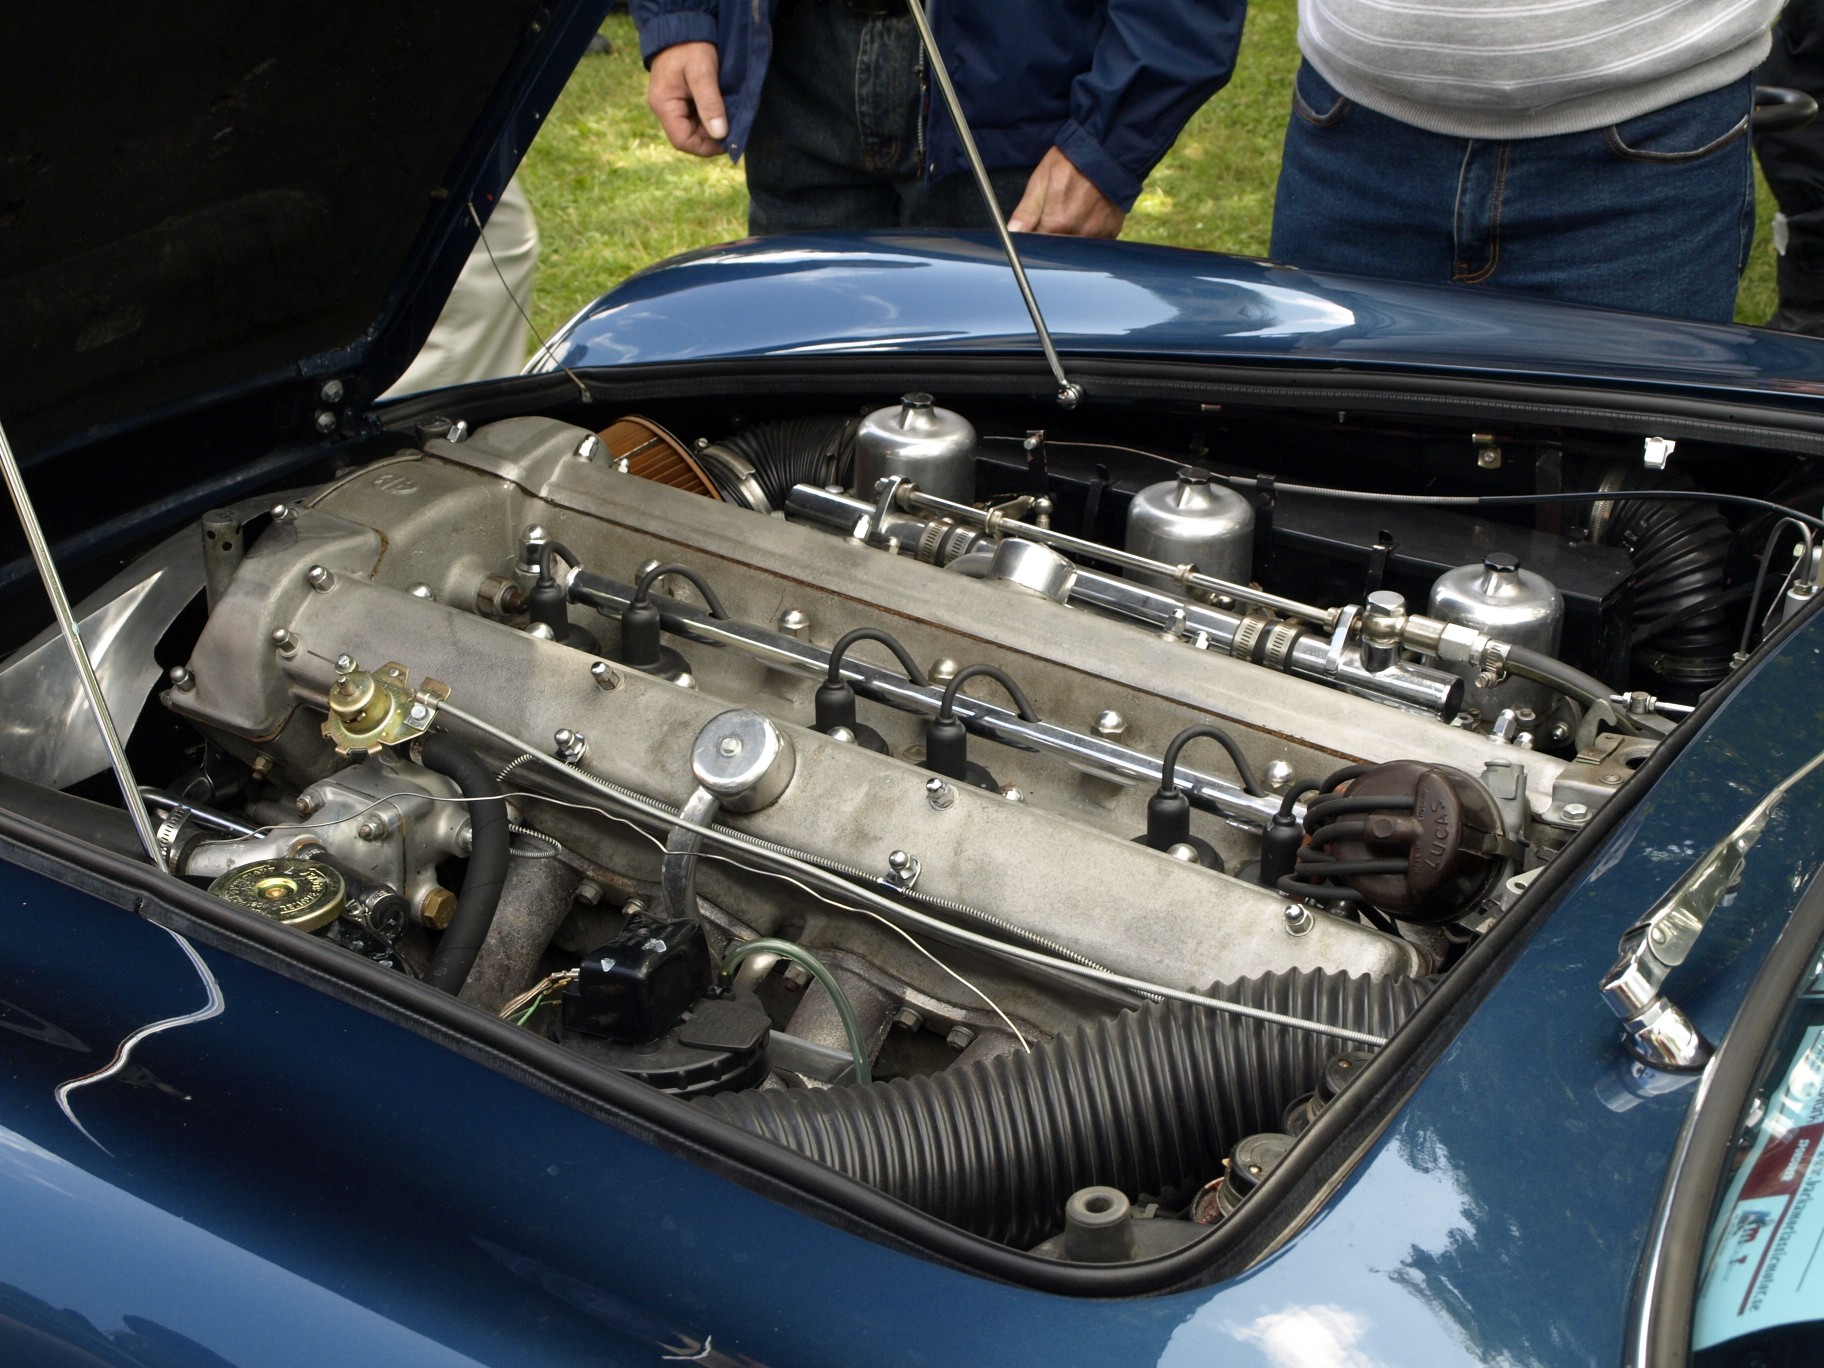 people are looking at an engine bay of a car